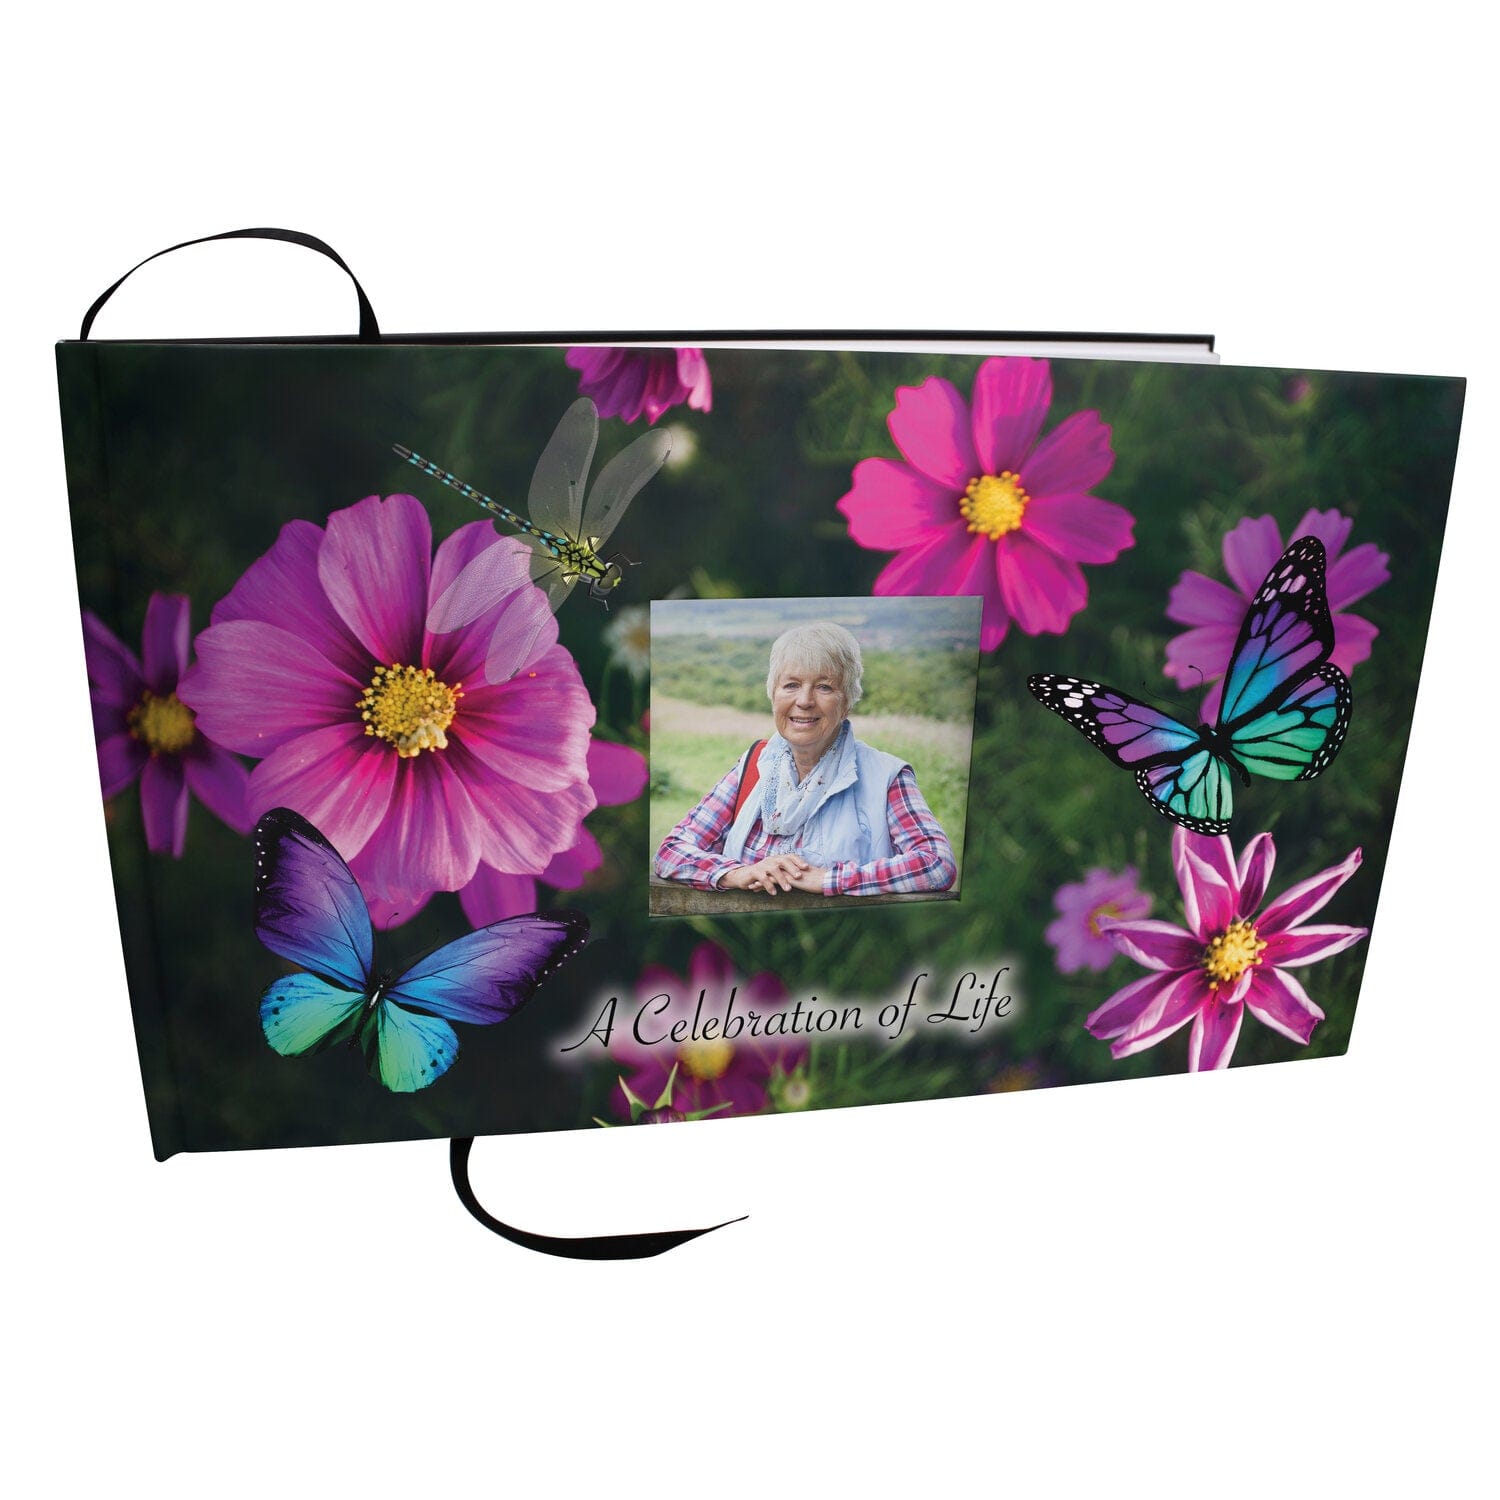 Commemorative Cremation Urns Magical Garden Matching Themed 'Celebration of Life' Guest Book for Funeral or Memorial Service